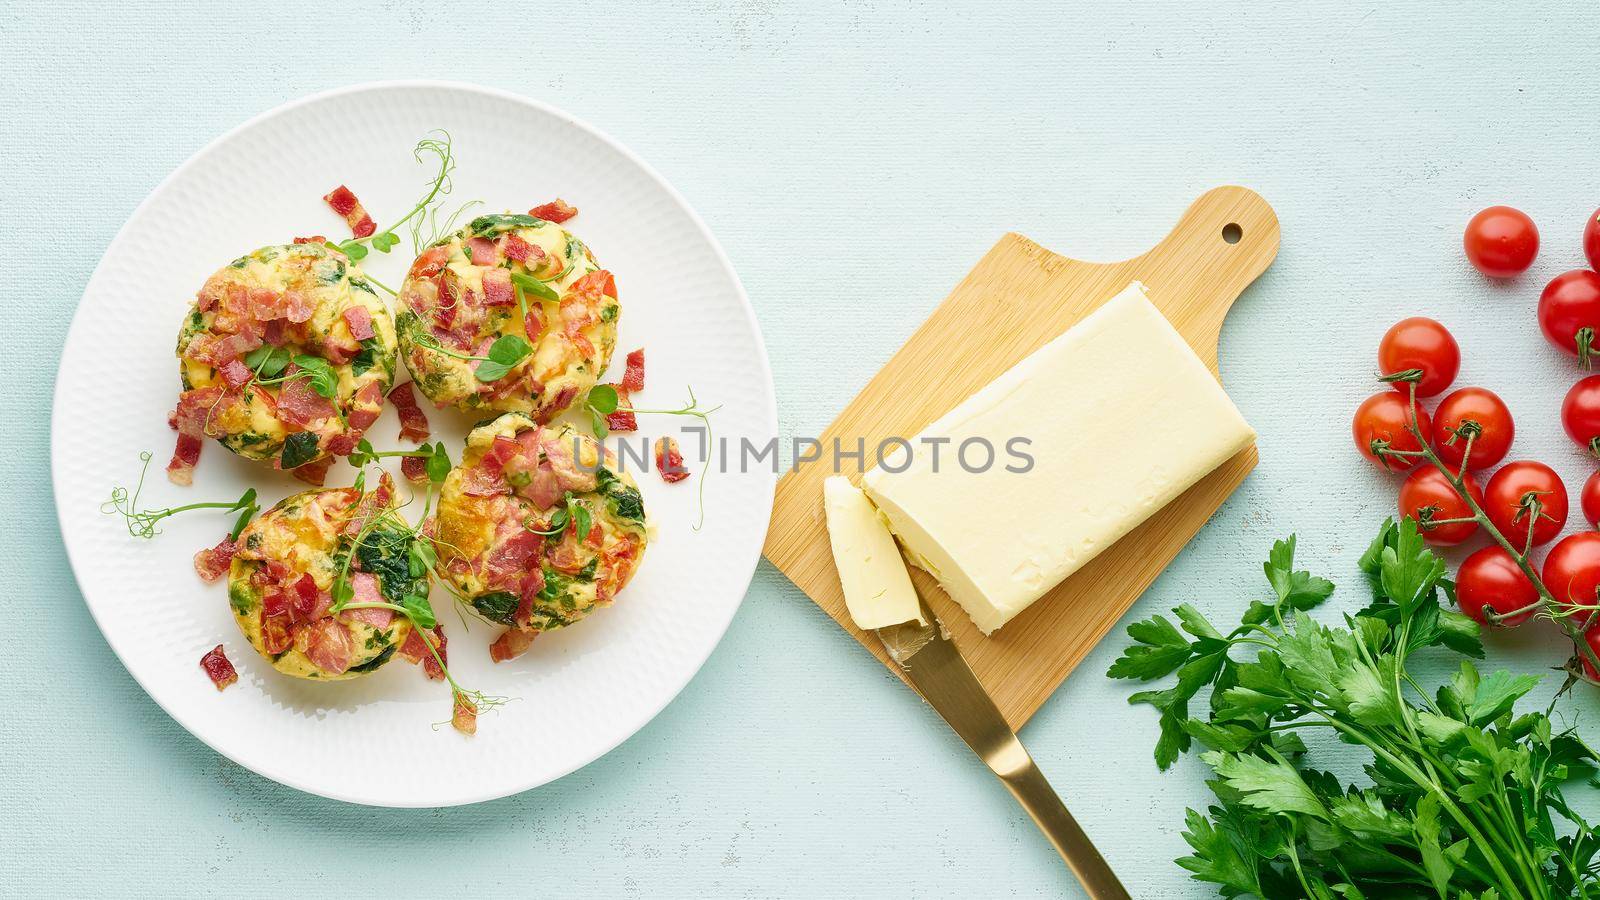 egg muffins with spinach, bacon and tomato, ketogenic keto diet low carb, pastel and modern background top view banner long